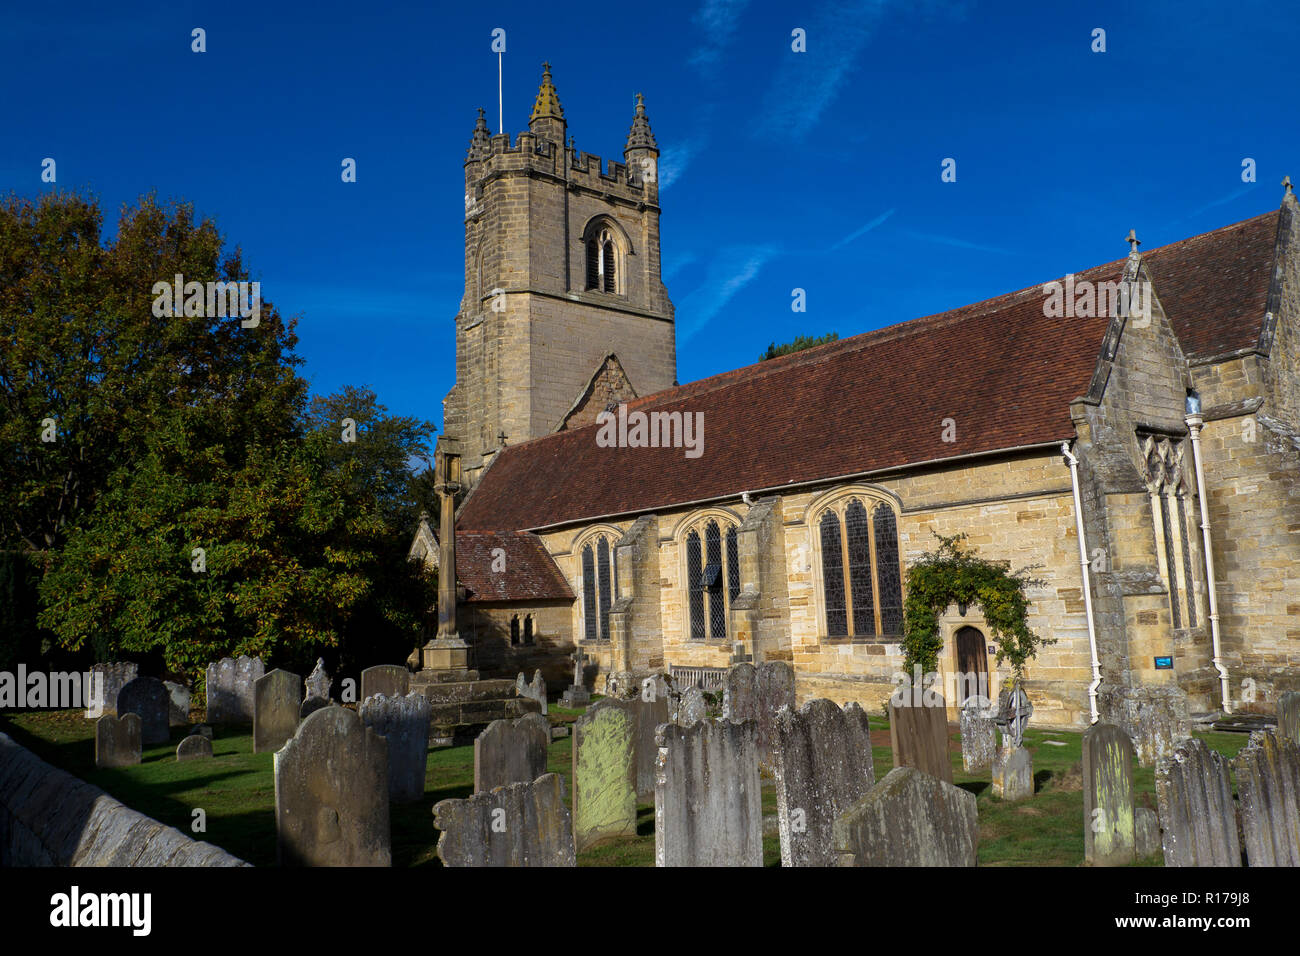 St. Mary's Church,Chiddingstone,Kent, England The present church has 13th century origins but was substantially rebuilt in the 14th century. The fine  Stock Photo